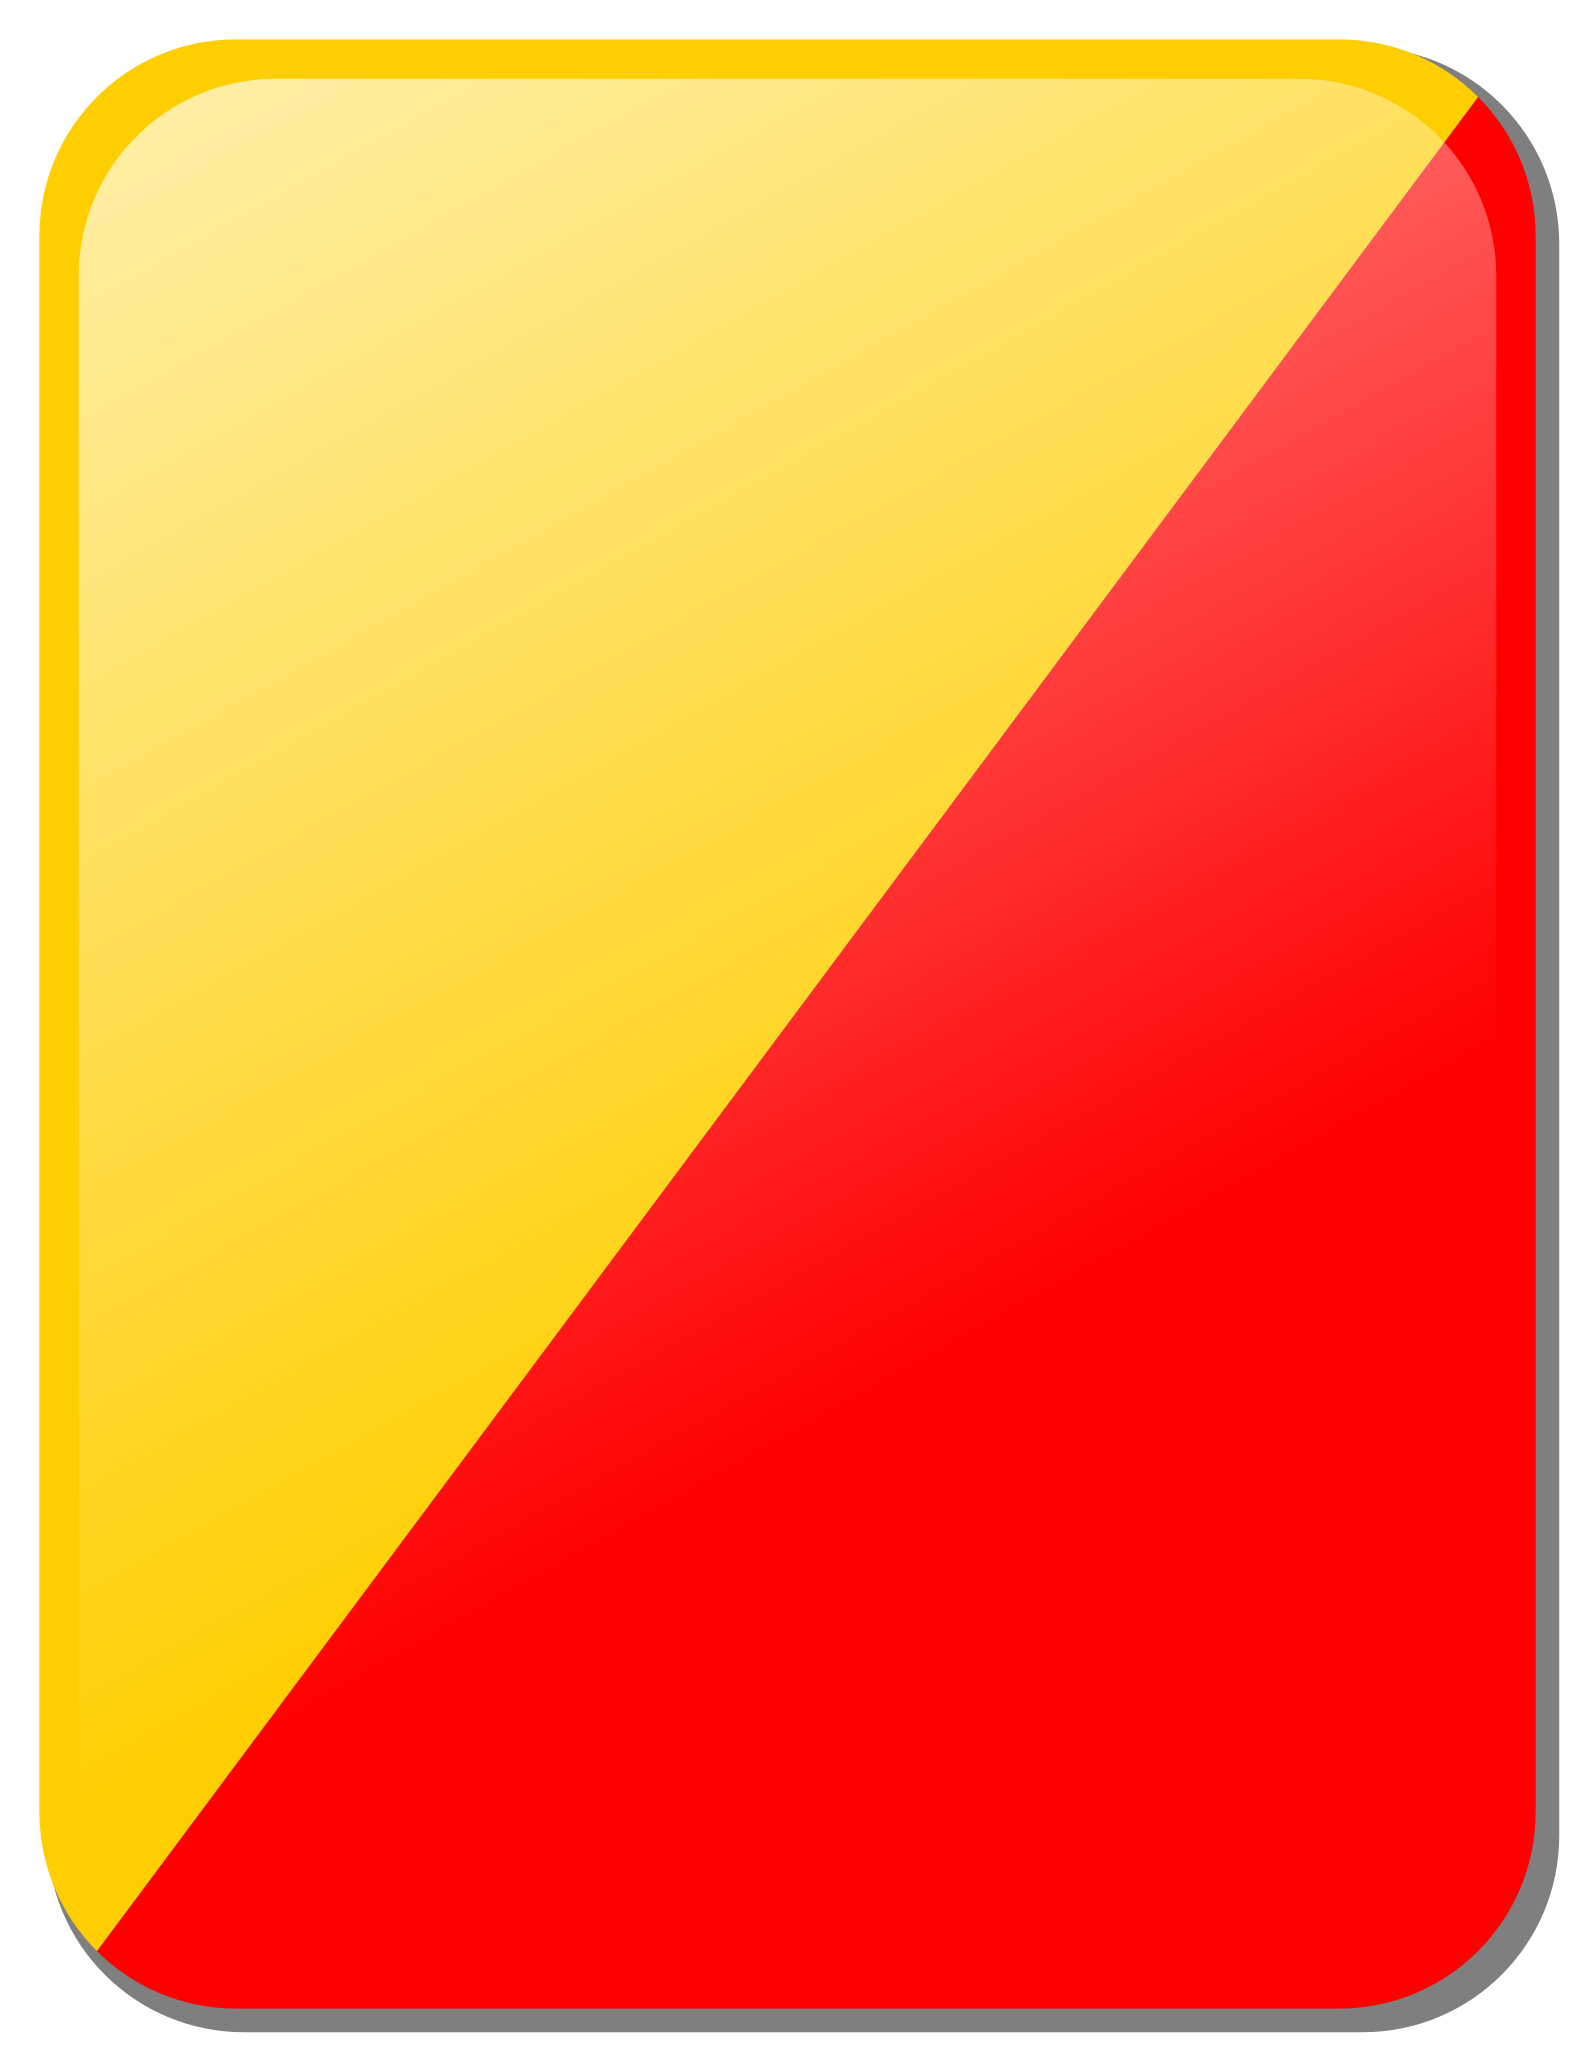 skyld Ed sporadisk File:Yellow Red Card.svg - Wikimedia Commons